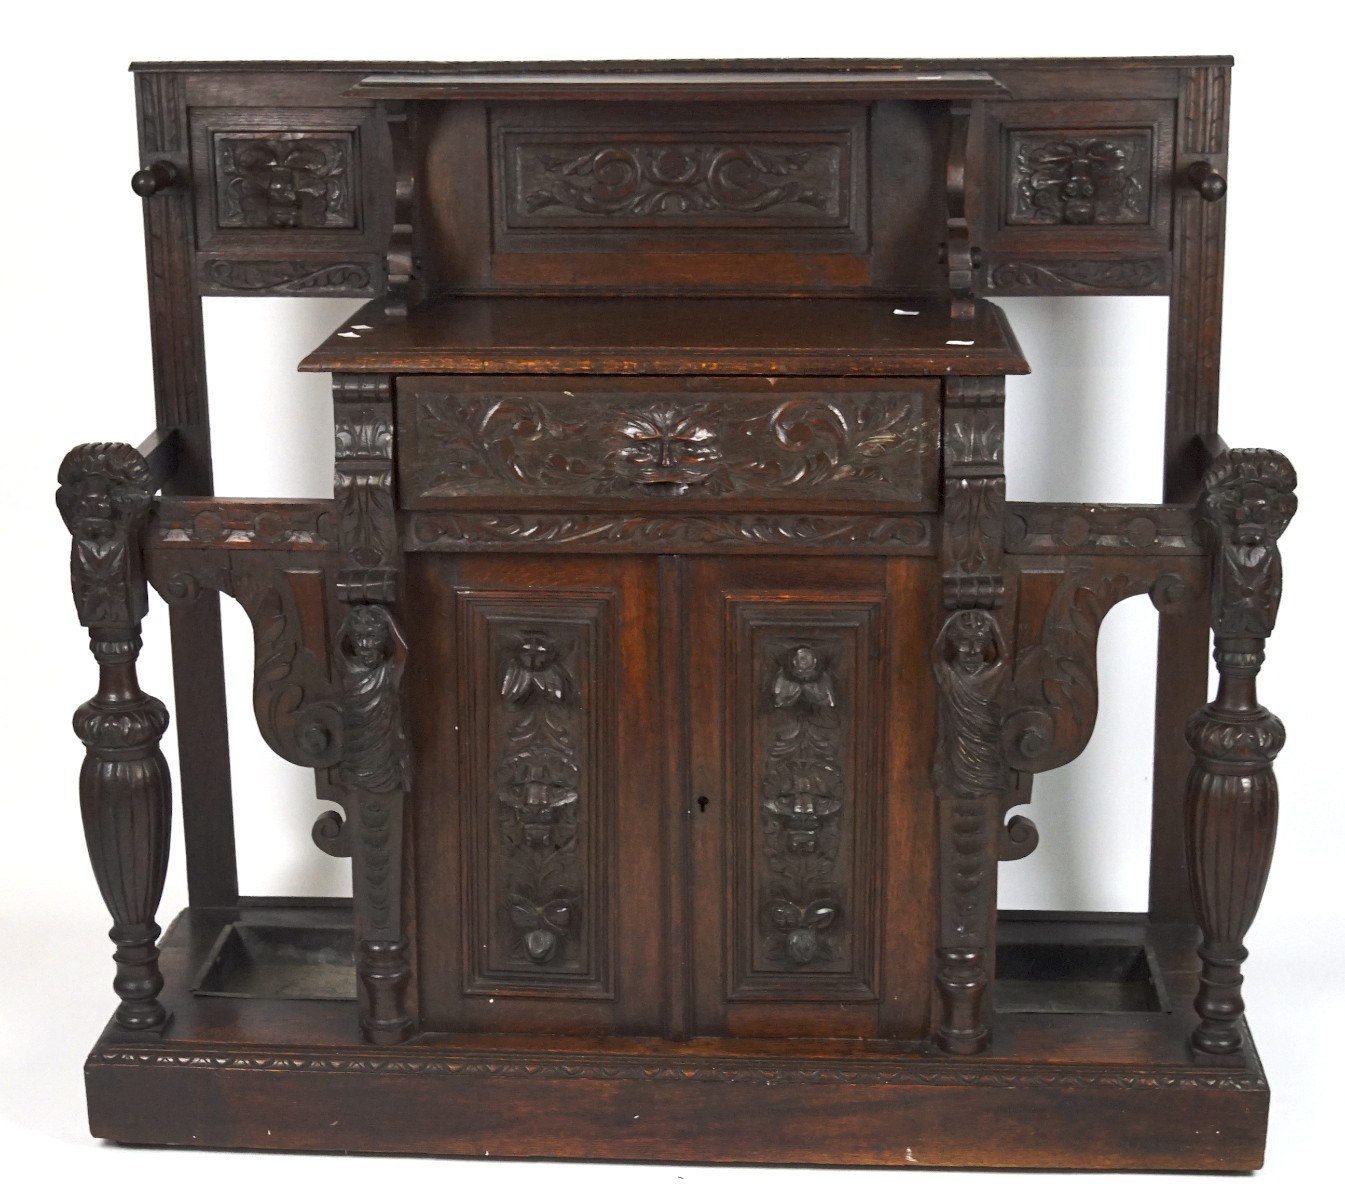 A 19th century oak hall stand, with highly carved decoration throughout,